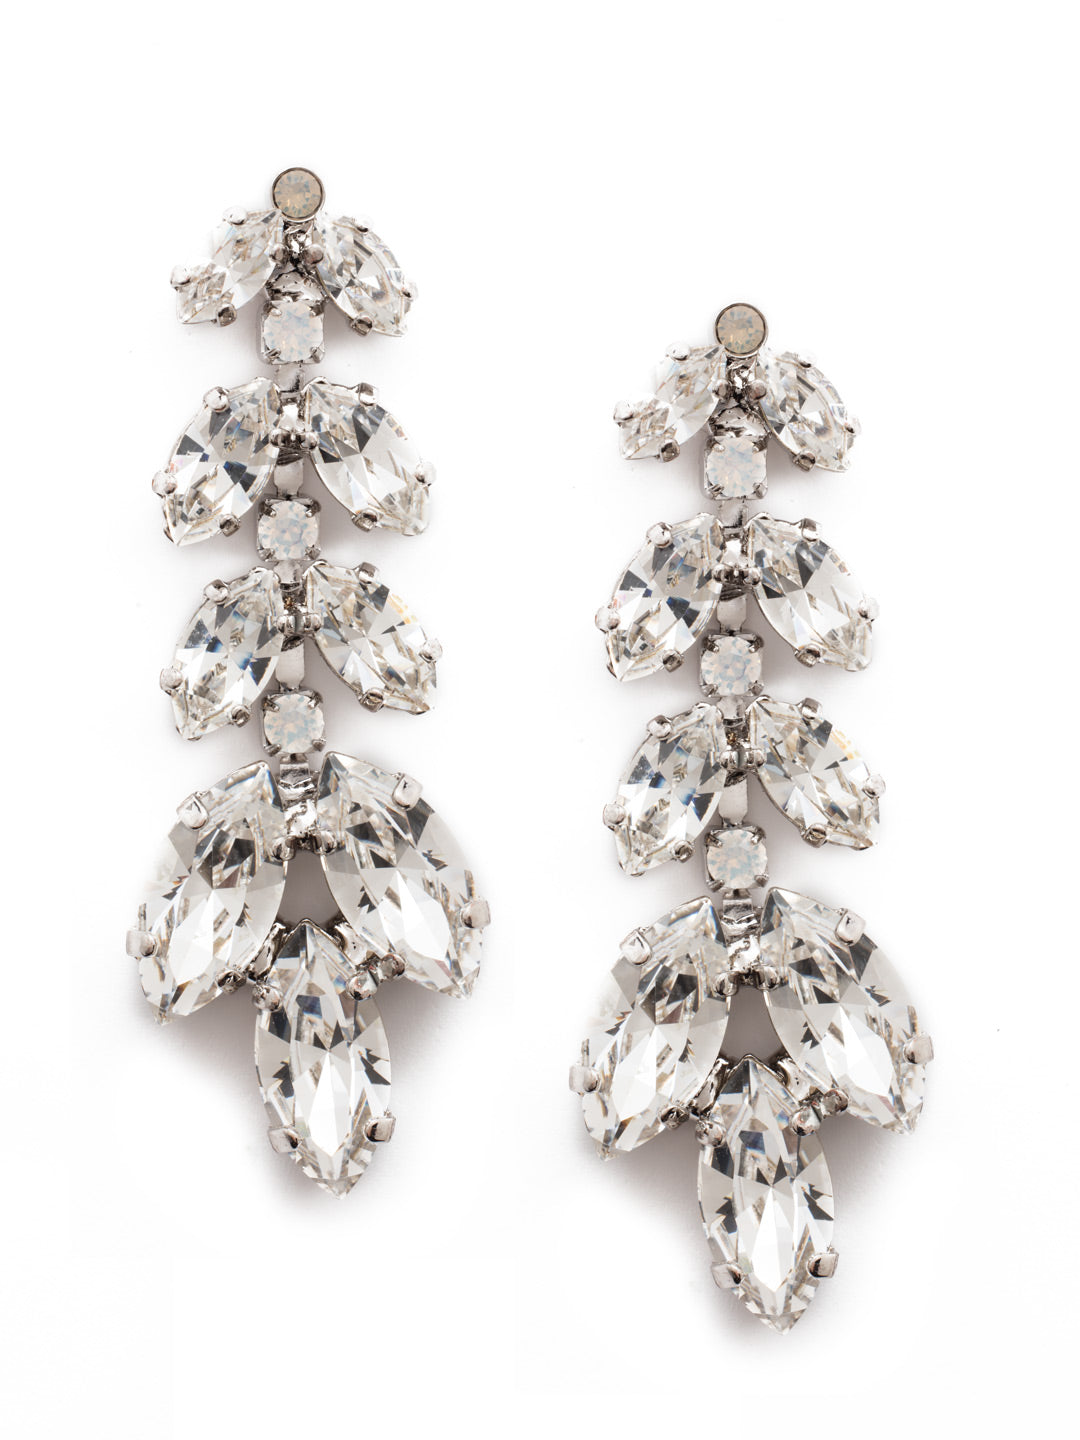 Repeating Navette Dangle Earrings - ECZ2RHWBR - <p>This dynamic drop earring evokes the essence of nature with it's leaf-like inspired design. Featuring paired navette crystals alternating with single round stones, this silhouette is sure to inspire your everyday look! From Sorrelli's White Bridal collection in our Palladium Silver-tone finish.</p>